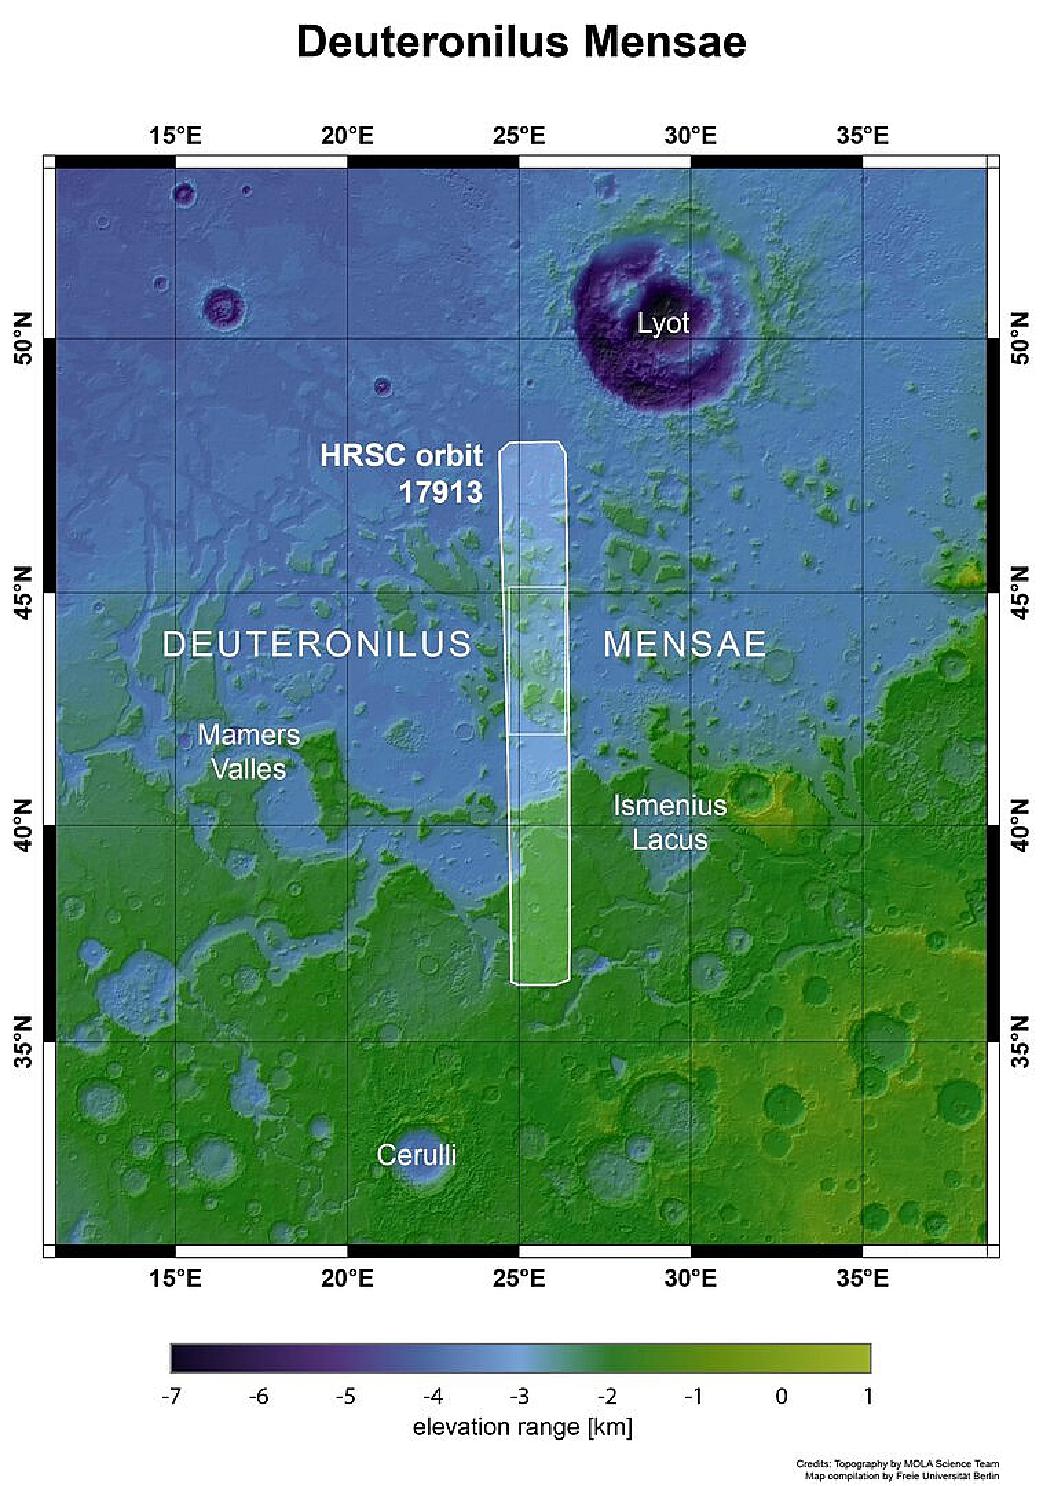 Figure 4: This image shows a region of Mars named Deuteronilus Mensae. The area outlined by the bold white box indicates the area imaged by the Mars Express High Resolution Stereo Camera on 25 February 2018 during orbit 17913 (image credit: NASA MGS MOLA Science Team)